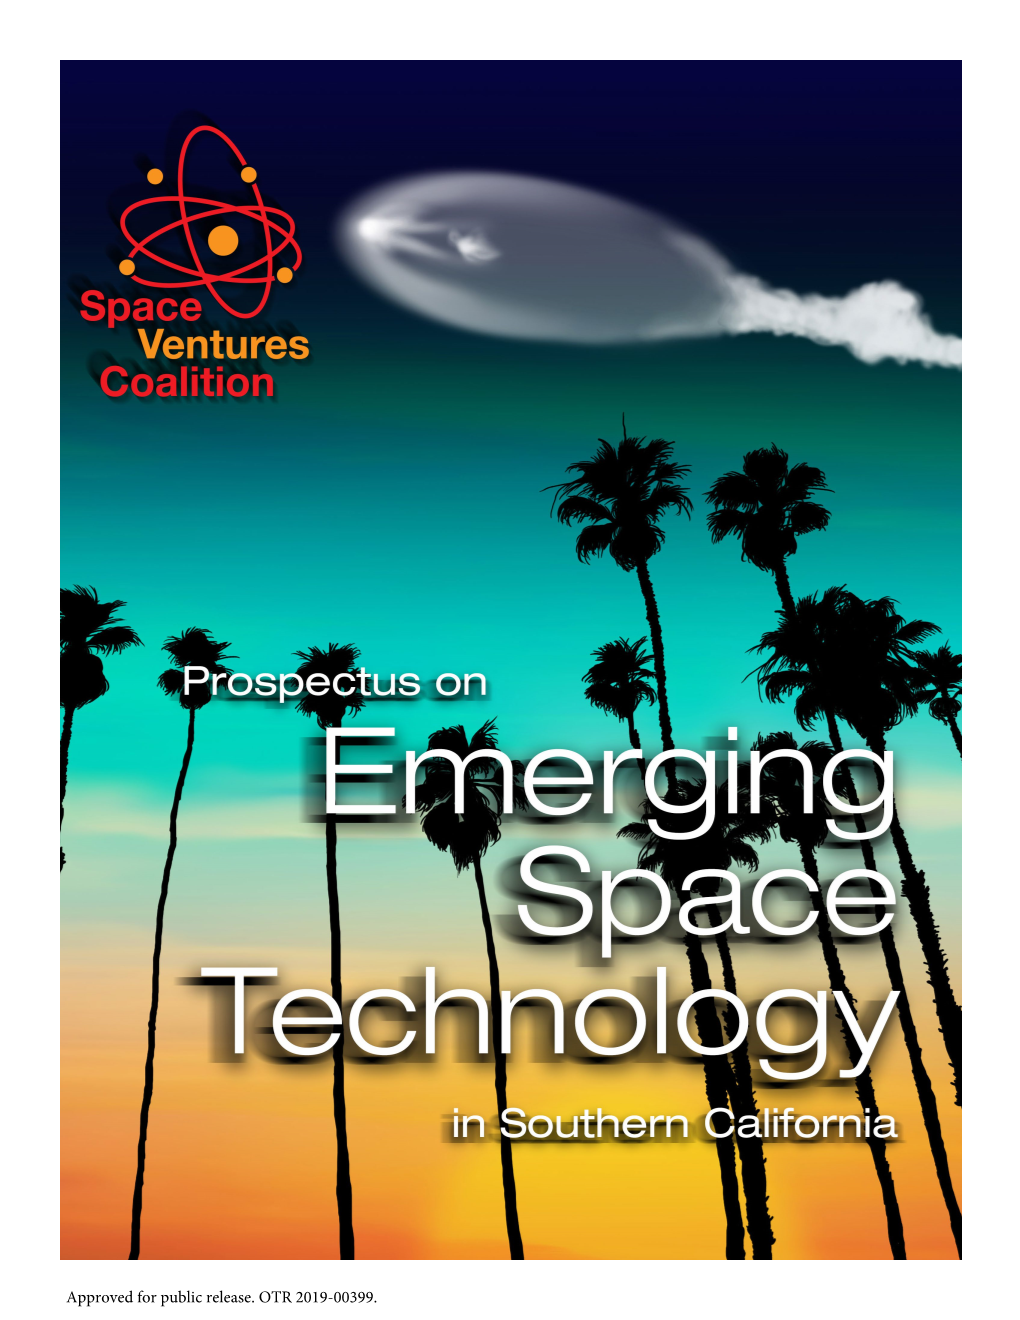 Approved for Public Release. OTR 2019-00399. Space Technology Surging As Leading Socal Tech Sector